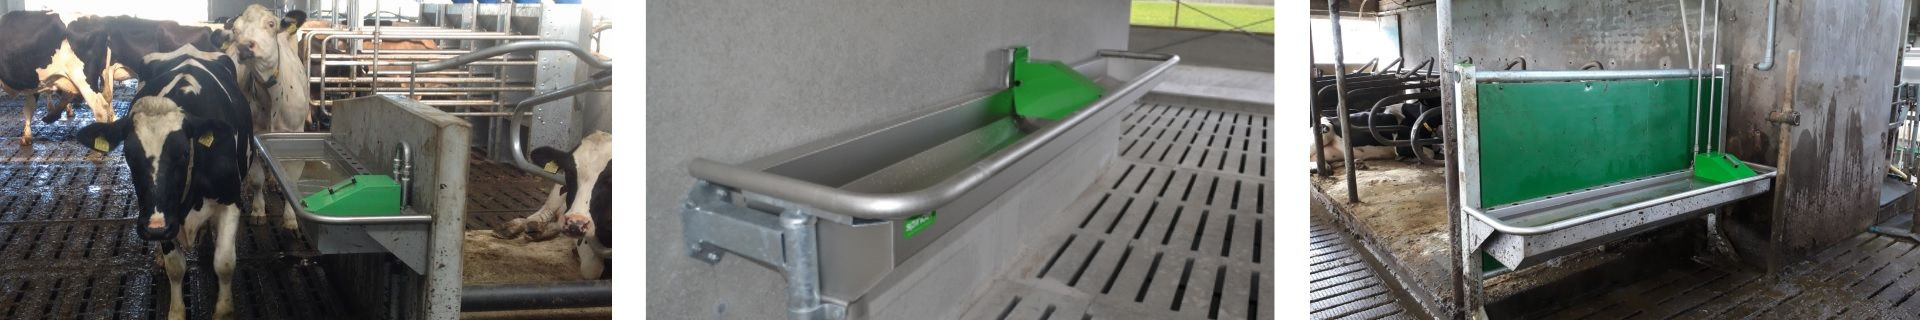 Spinder stainless steel Pingo drinking troughs